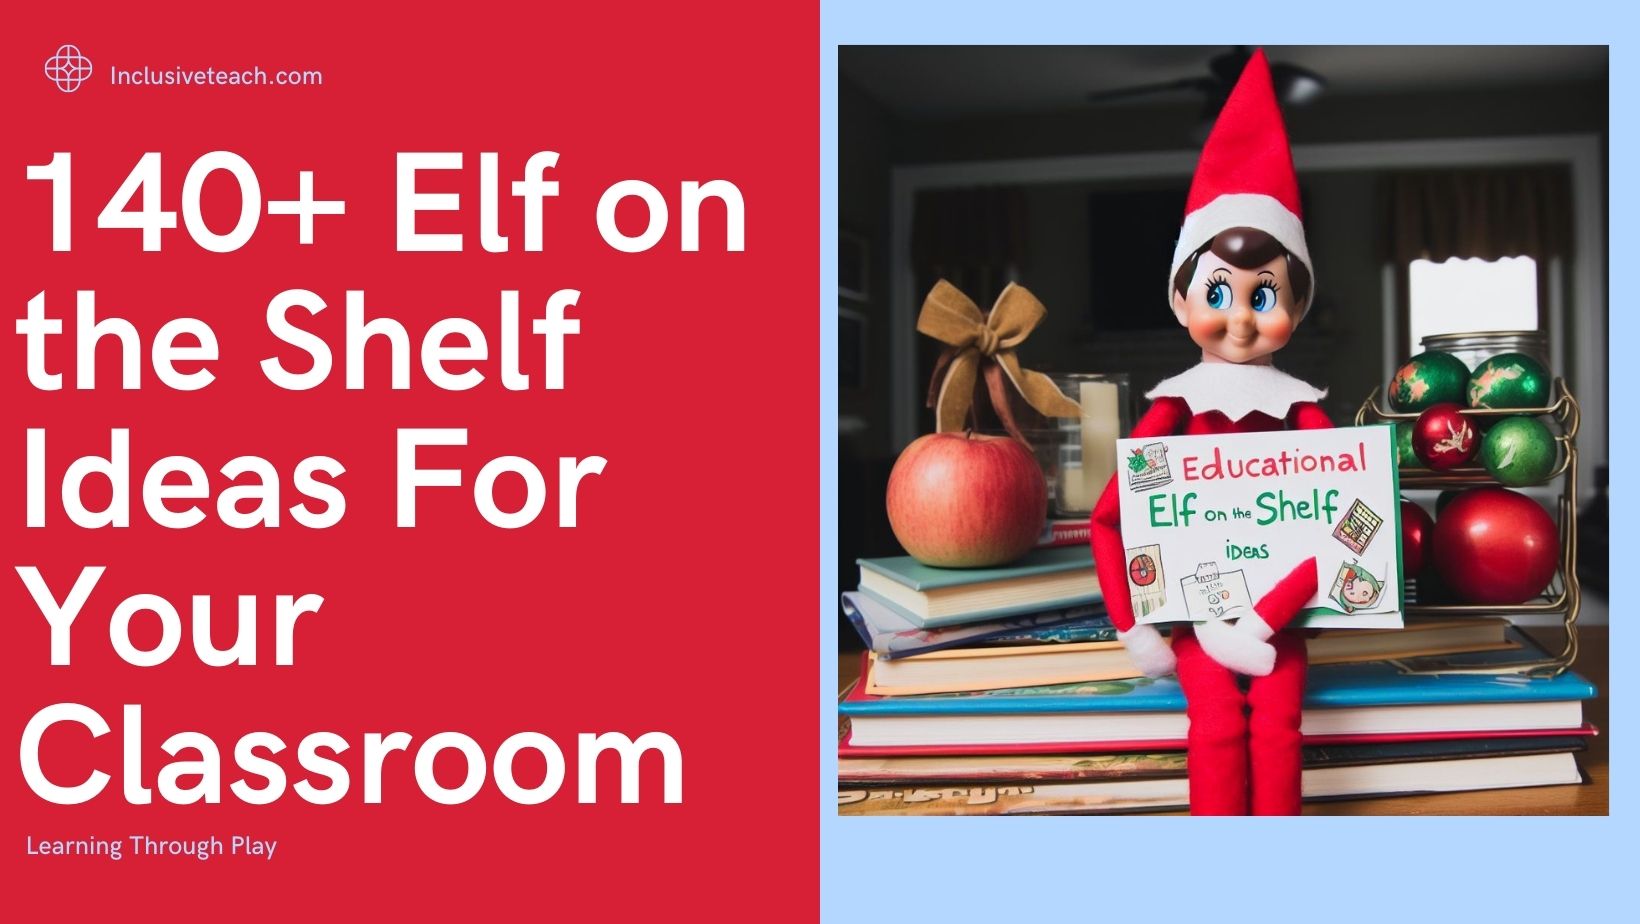 140+ Elf on the Shelf Ideas For Your Classroom This Christmas